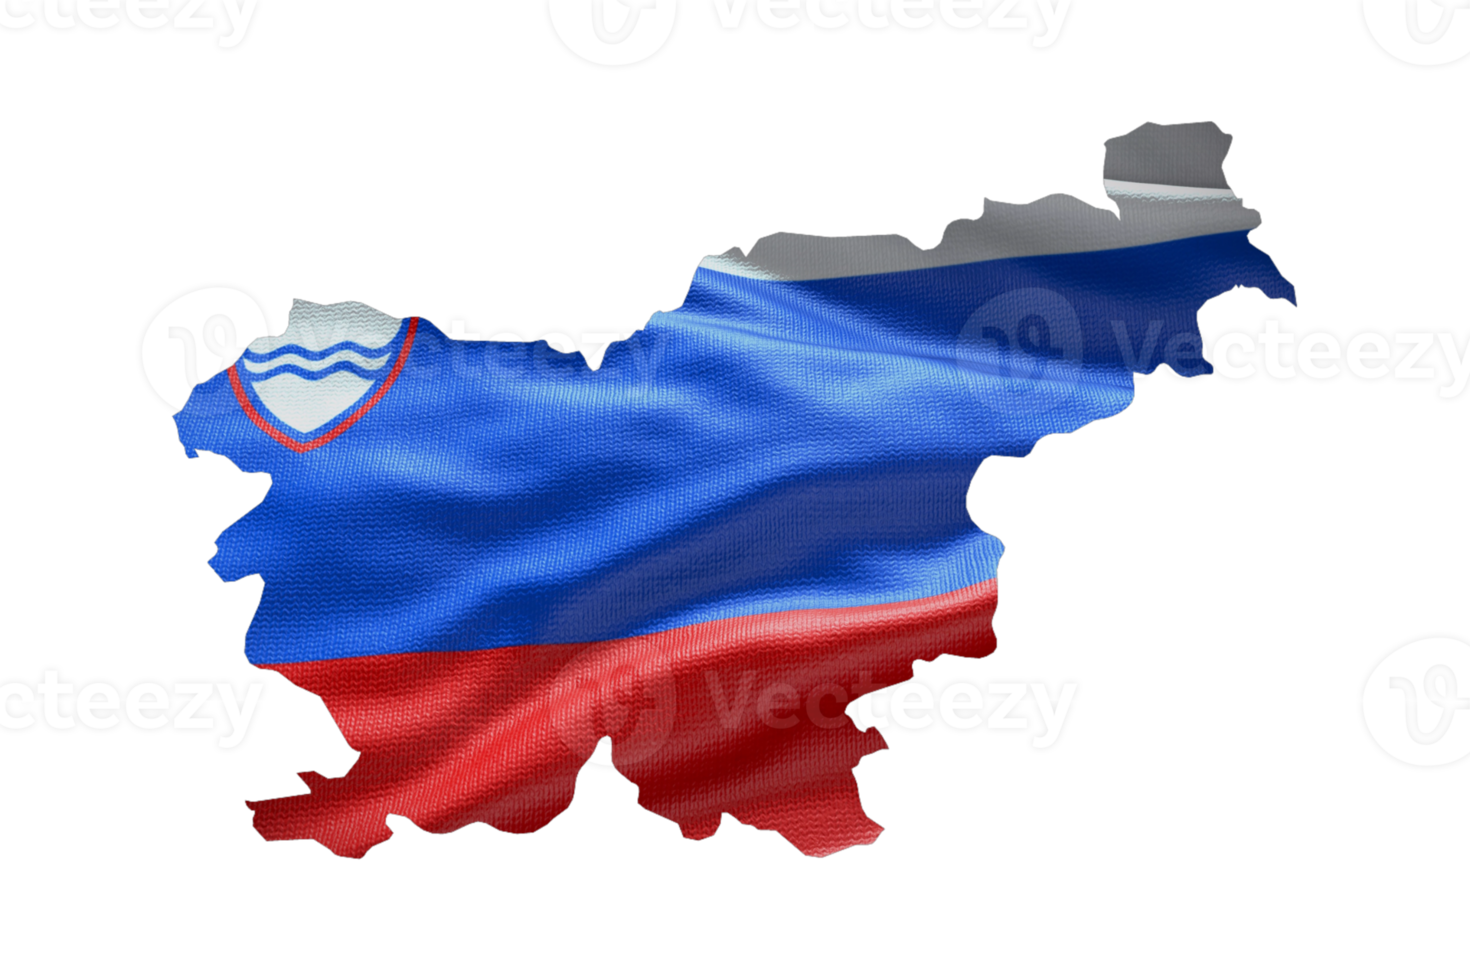 Slovenia map outline icon. PNG alpha channel. Country with national flag